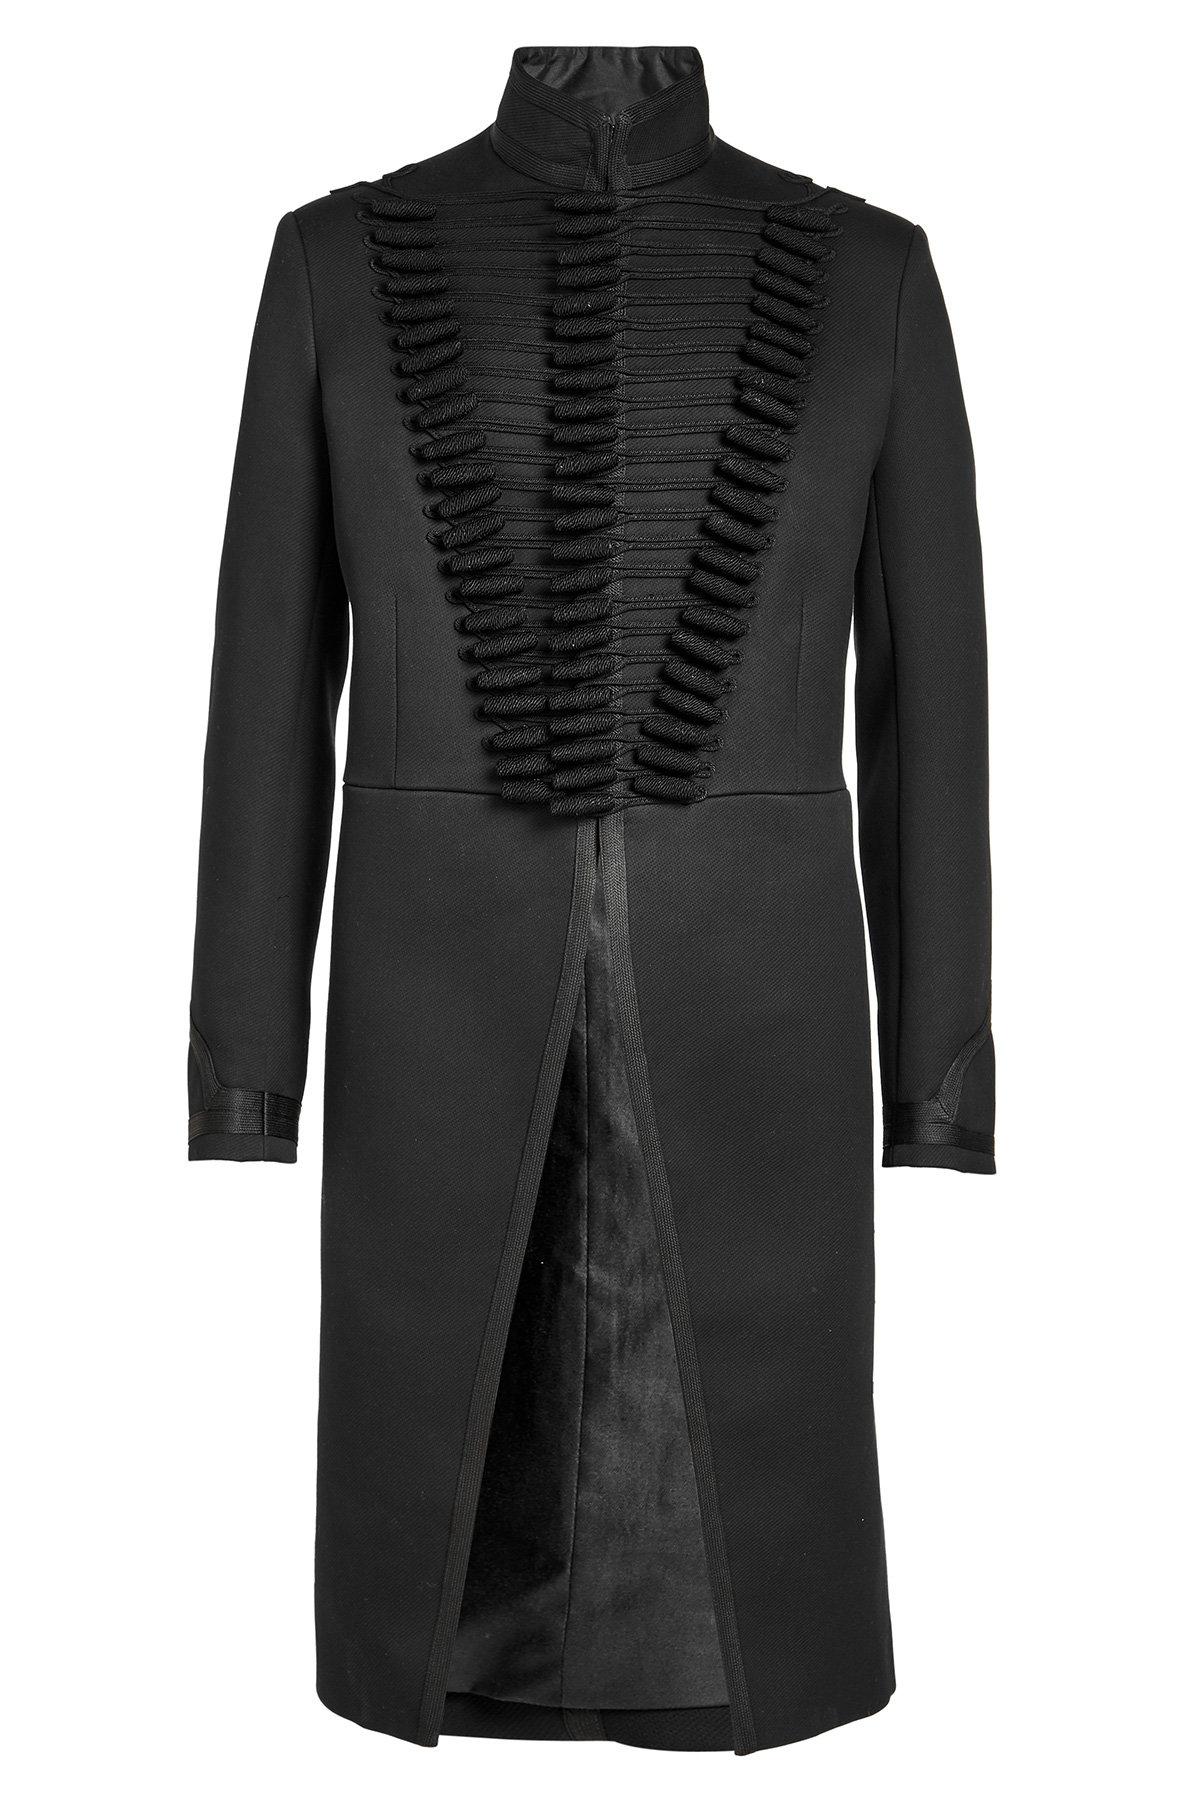 Alexander McQueen Military Coat With Cotton And Silk in Black for Men ...